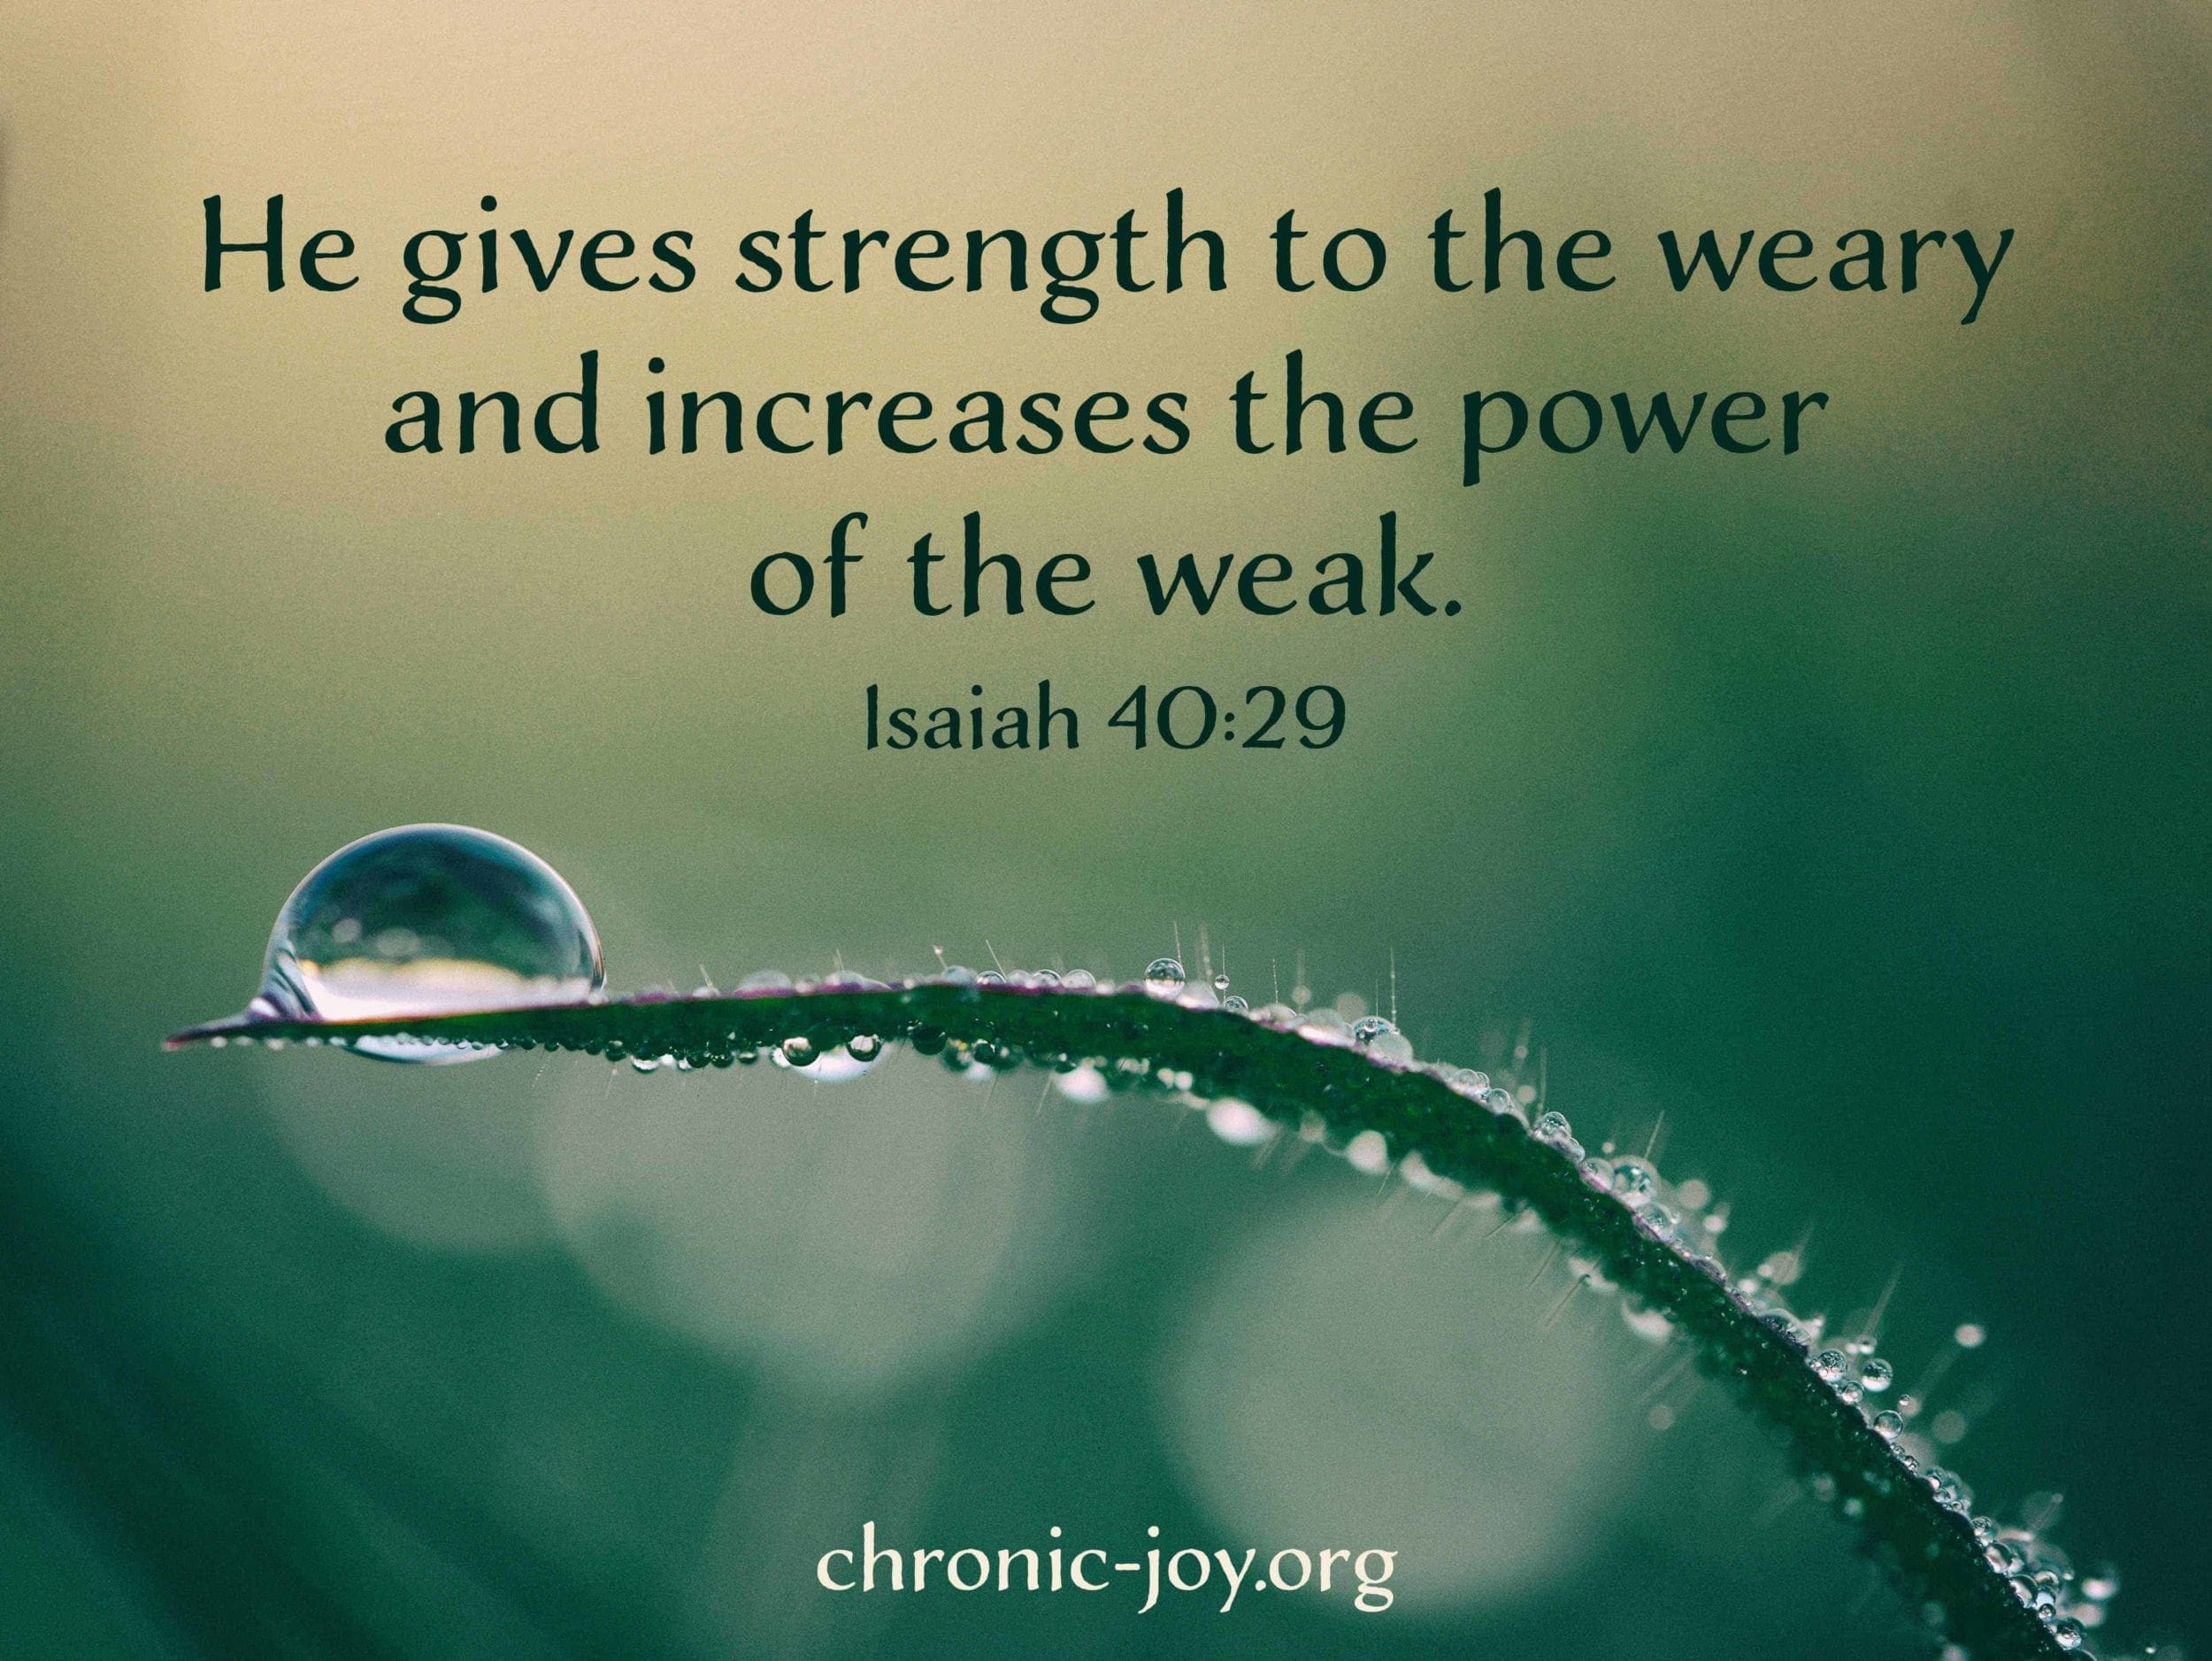 He gives strength to the weary and increases the power of the weak. (Isaiah 40:29)